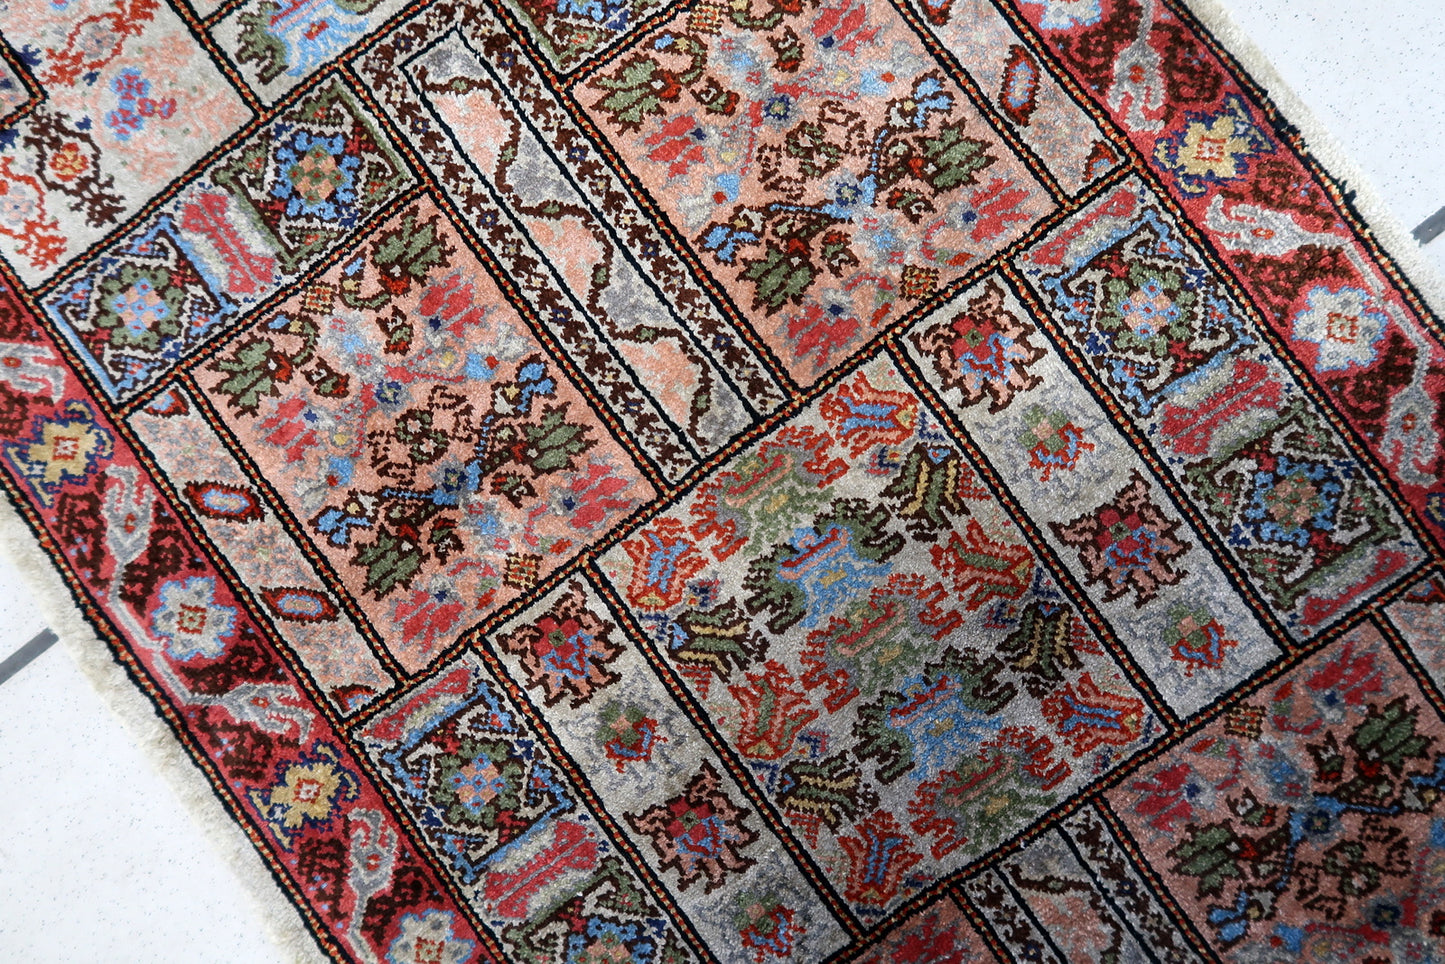  Side view of the small rectangular rug made from luxurious silk fibers